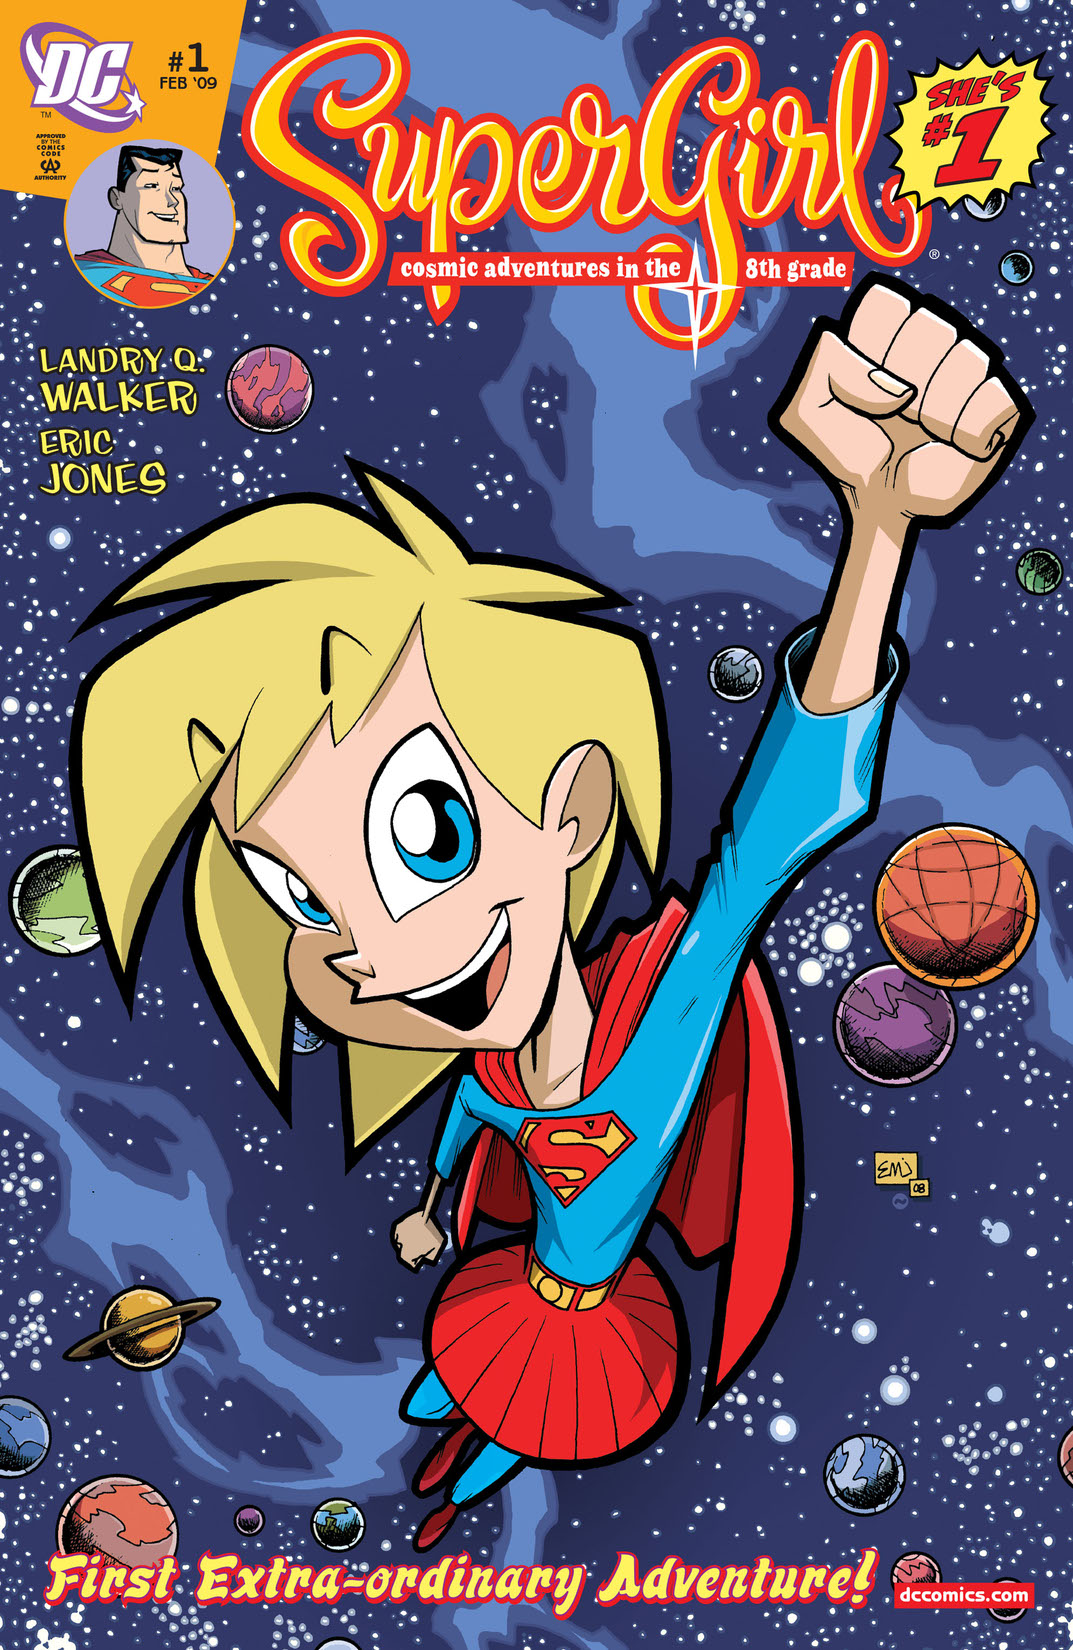 Supergirl: Cosmic Adventures in the 8th Grade #1 preview images